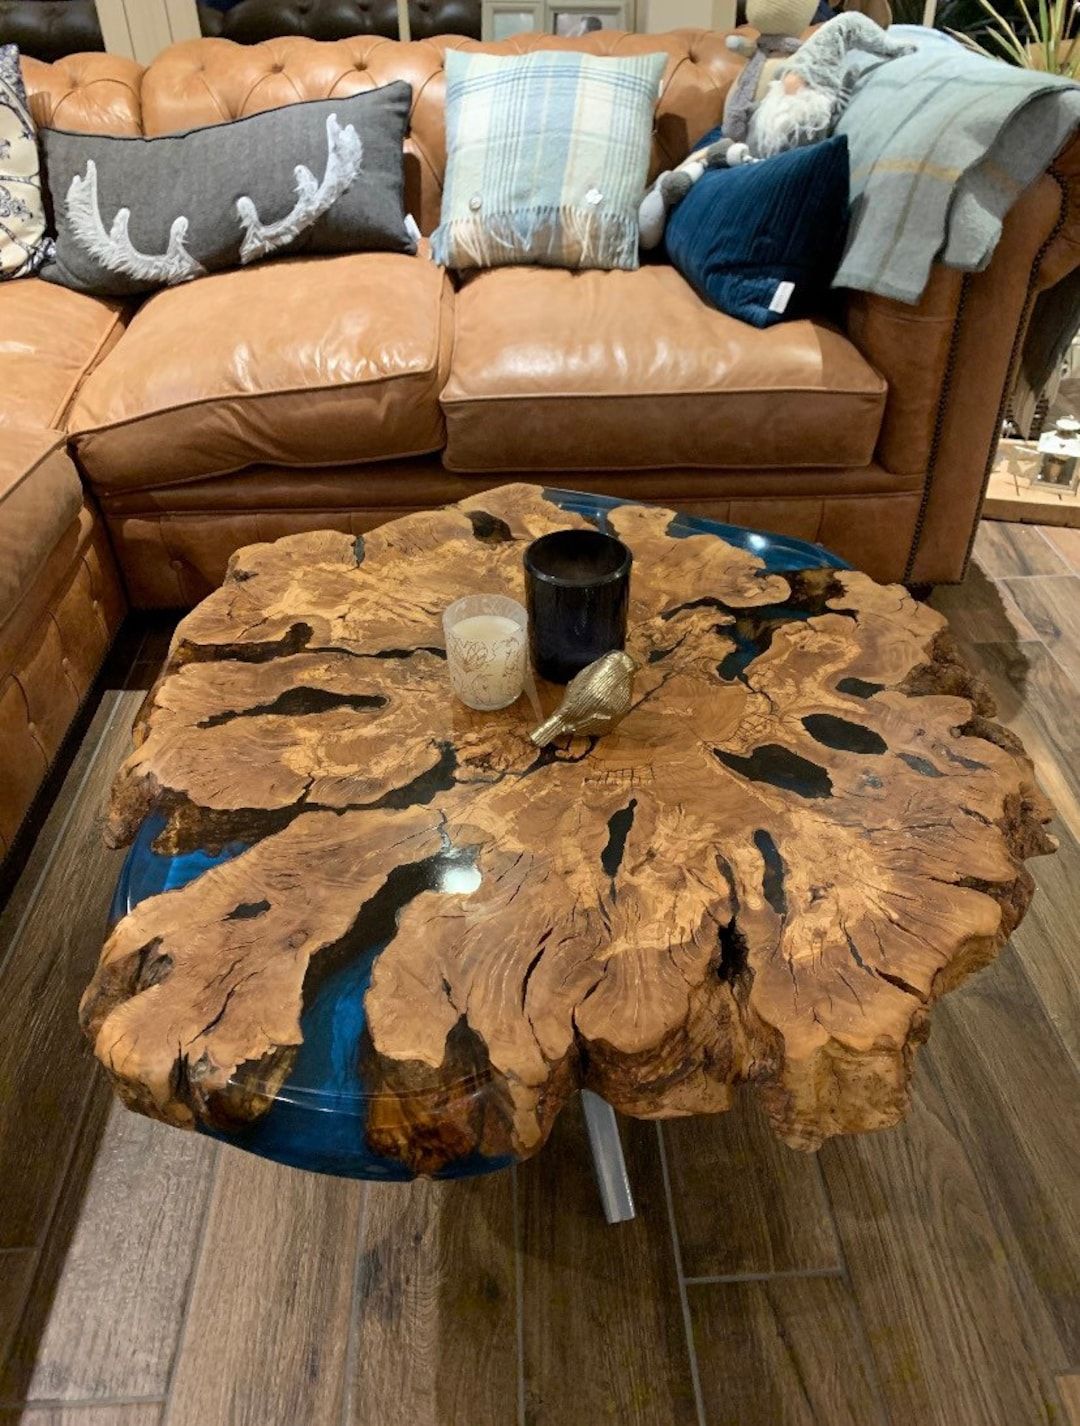 Live Edge Coffee Table With Epoxy Resin Olive Wood Burl Slab – Etsy Uk Within Coffee Tables For 4 6 People (Gallery 19 of 20)